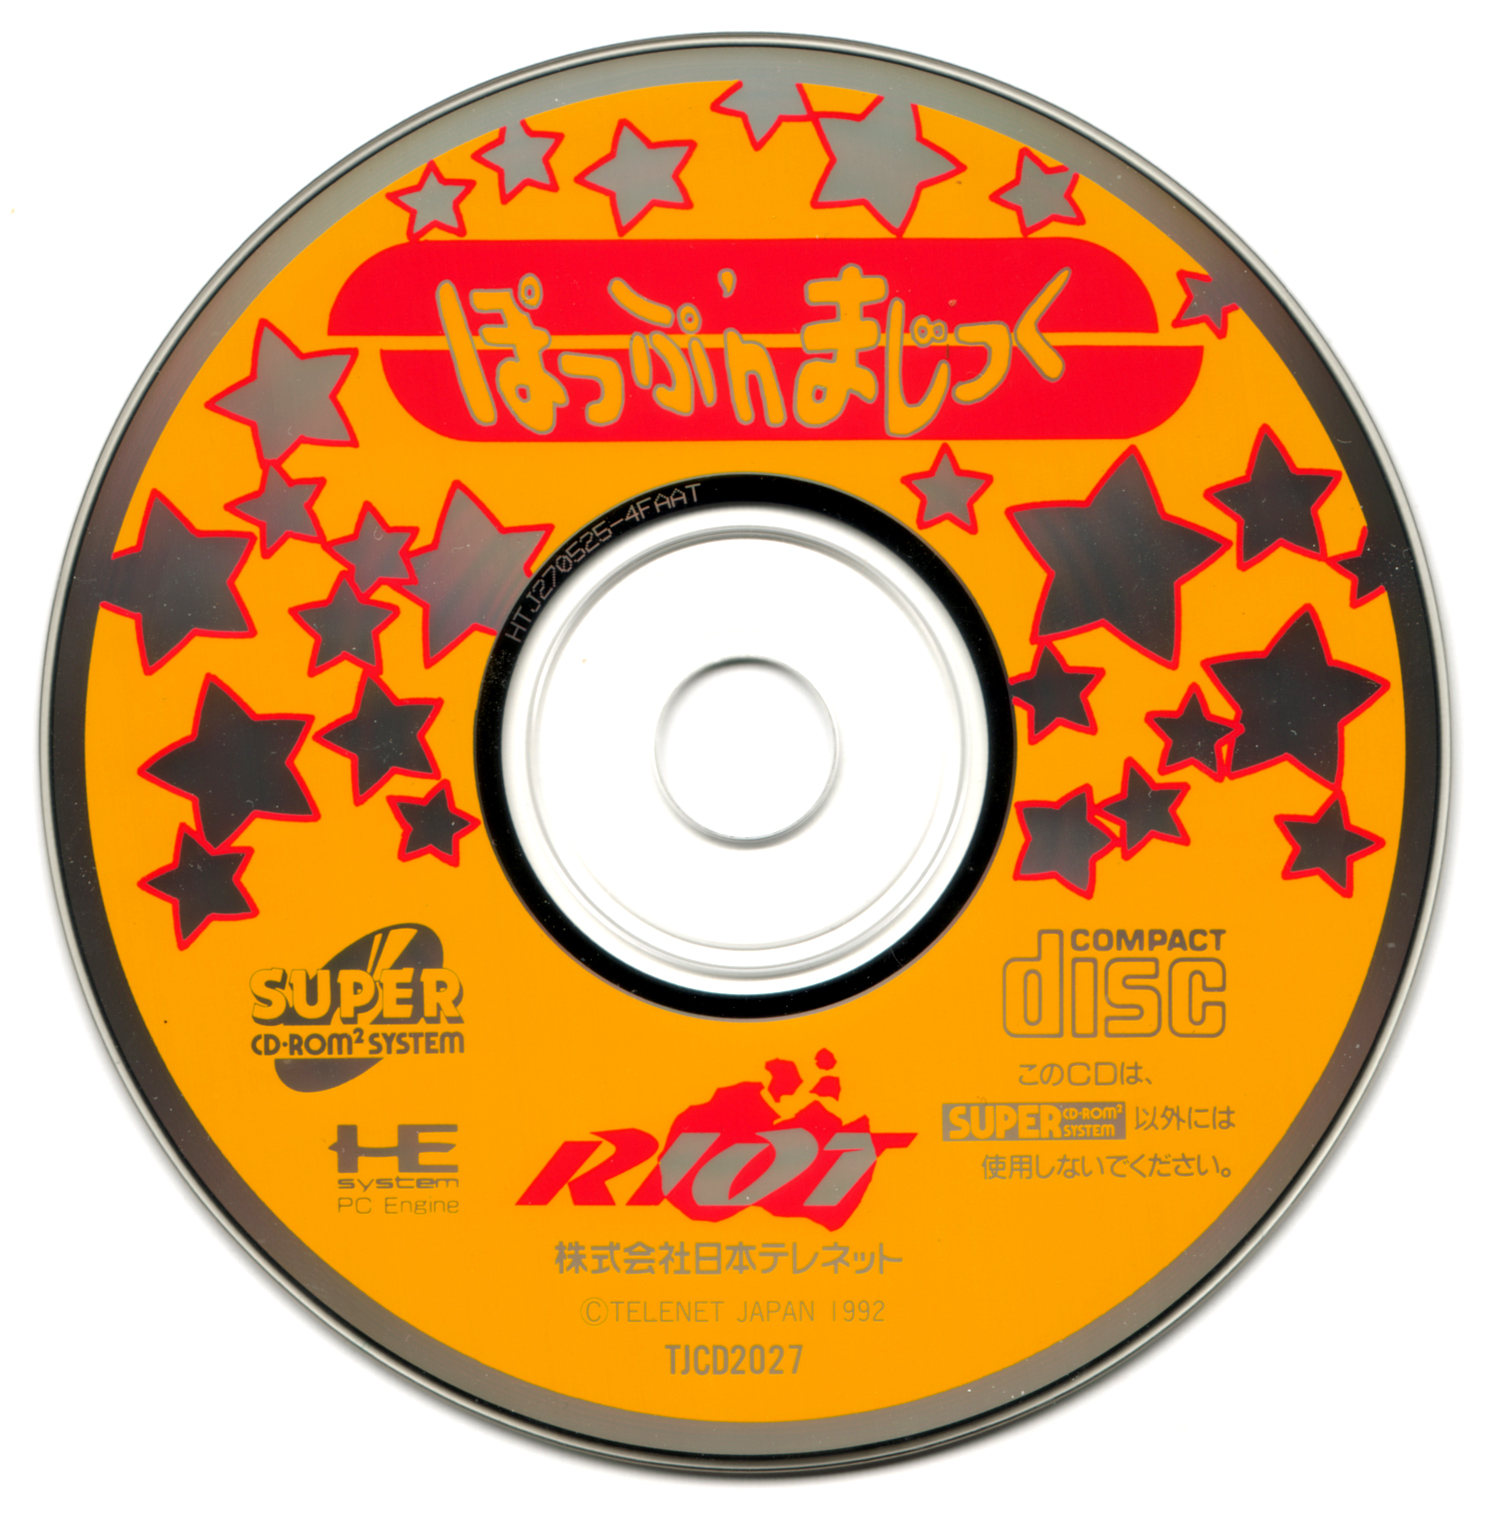 Pop 'n Magic - The PC Engine Software Bible